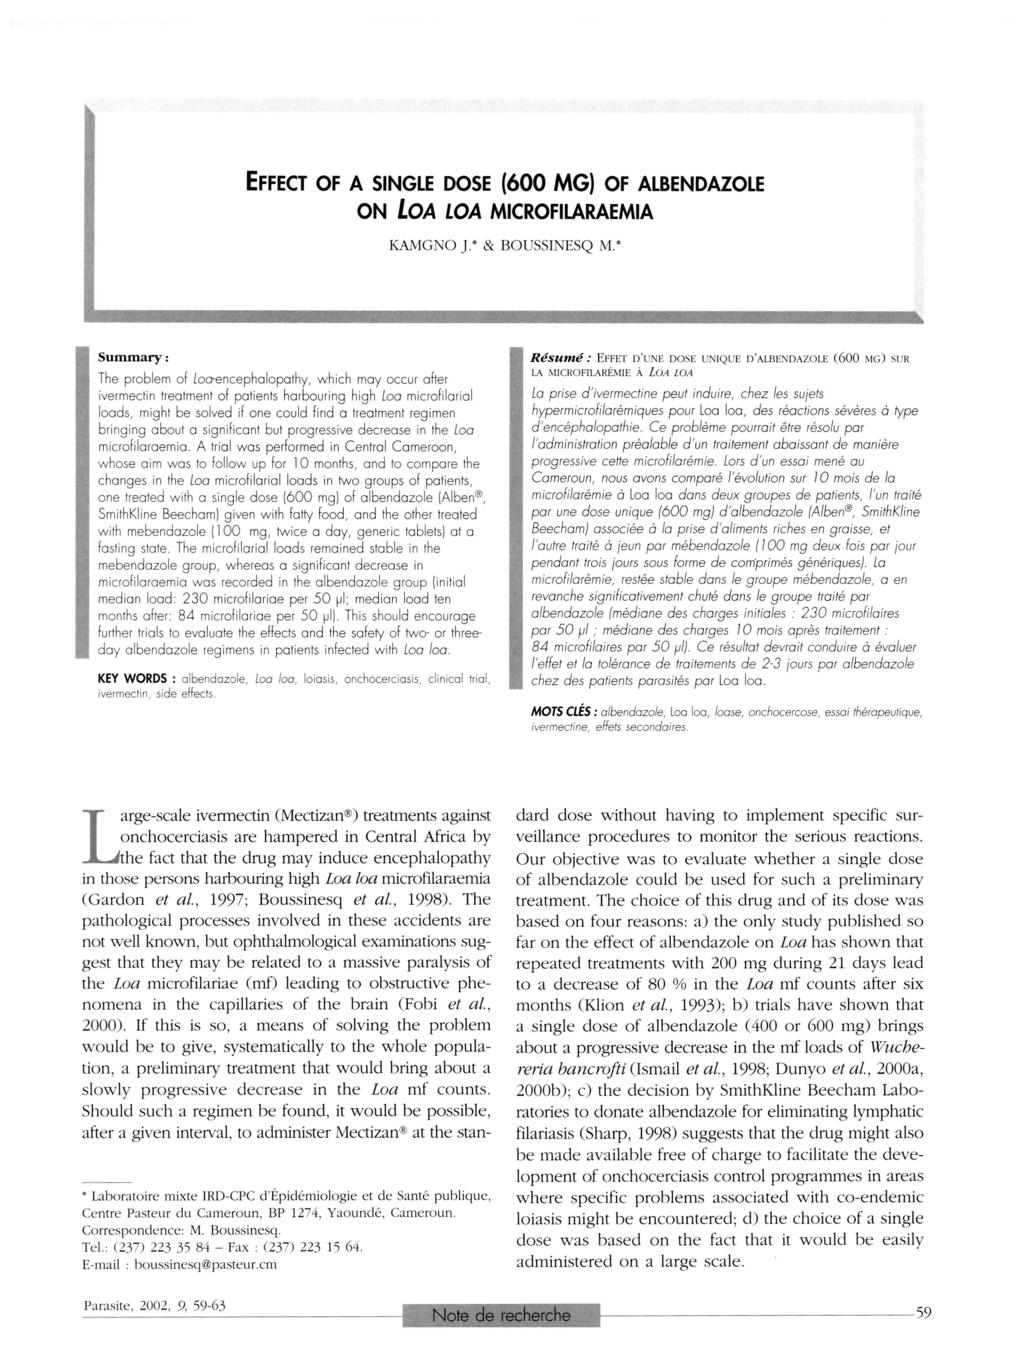 Article available at http://www.parasite-journal.org or http://dx.doi.org/10.1051/parasite/200209159 EFFECT OF A SINGLE DOSE (600 MG) OF ALBENDAZOLE ON LOA LOA MICROFILARAEMIA KAMGNO J.